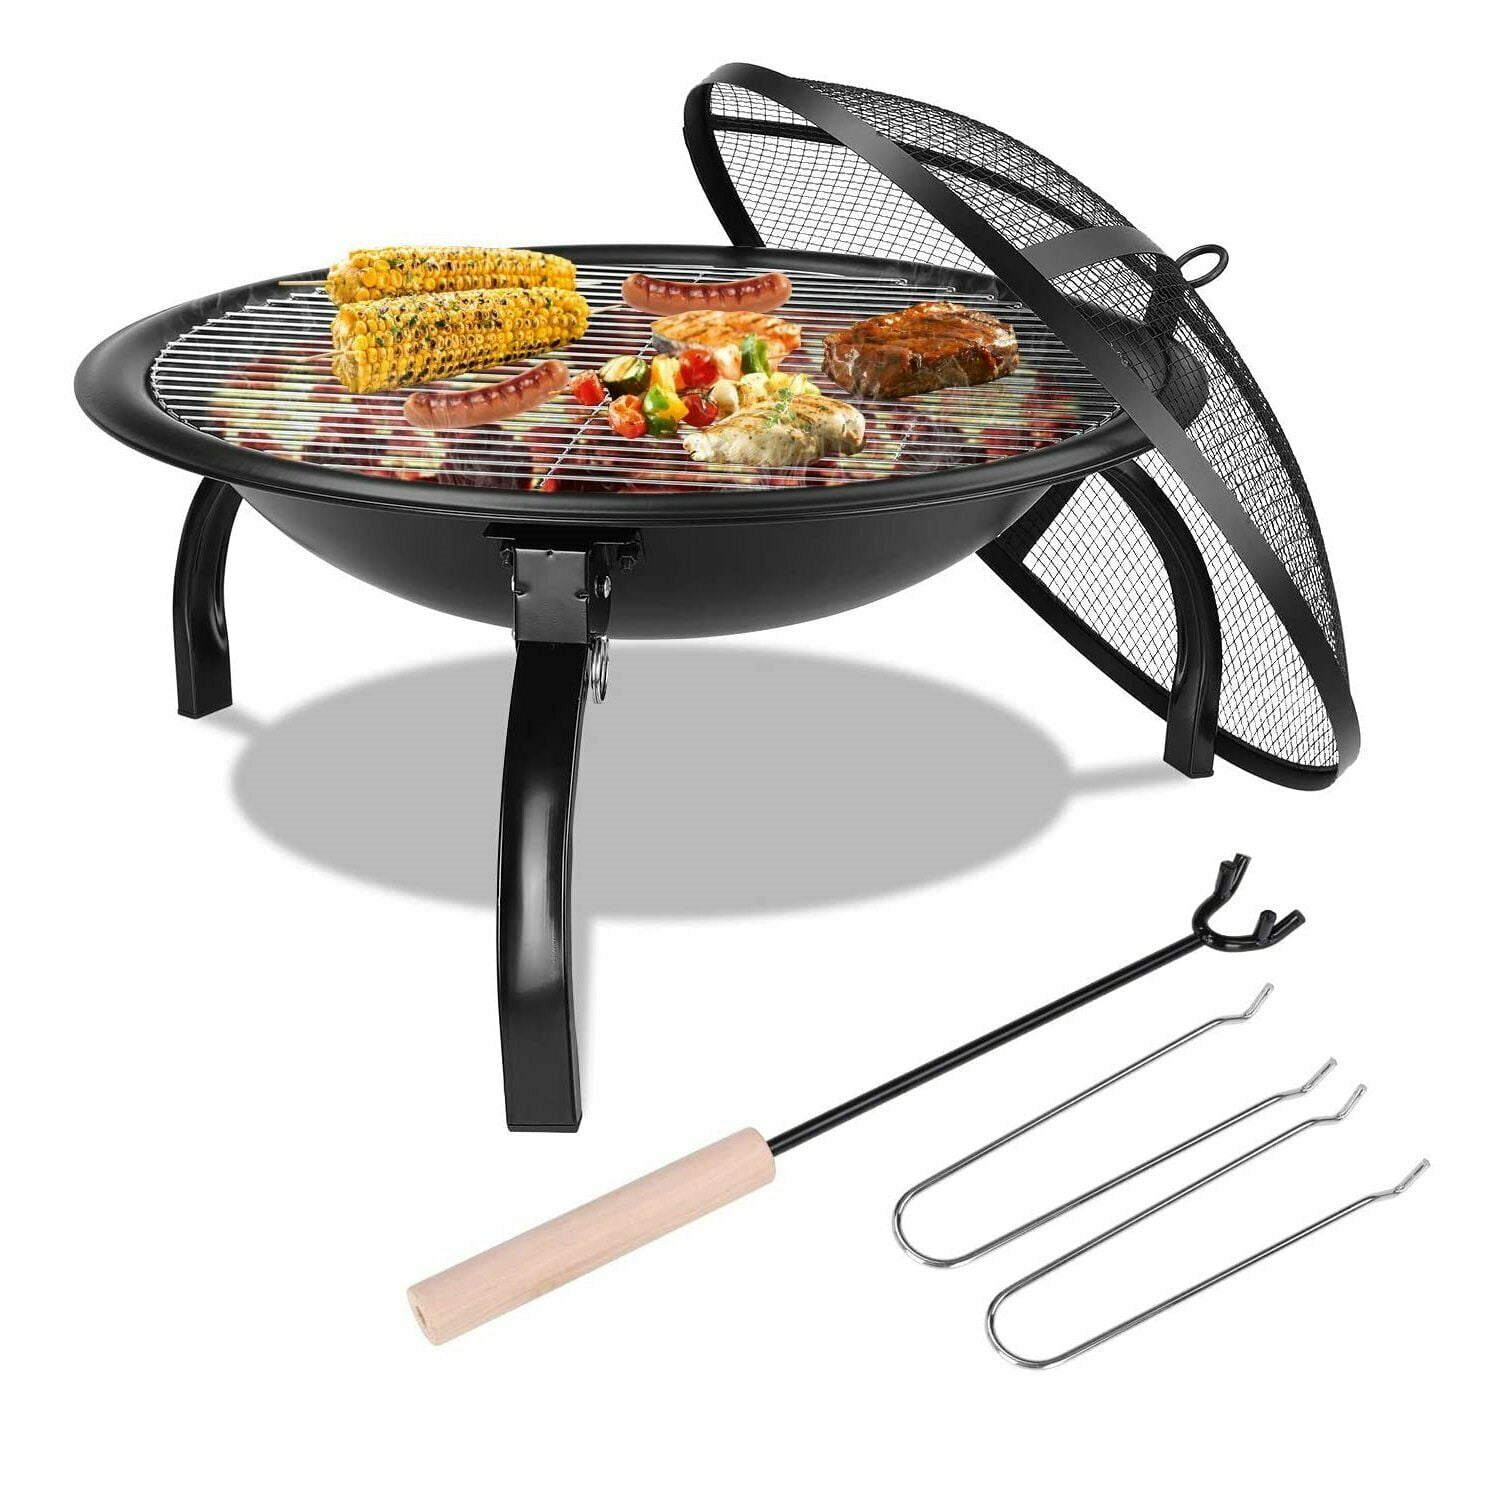 D Tools Backyard Outdoor Fire Pit, Fire Pit Roasting Tools